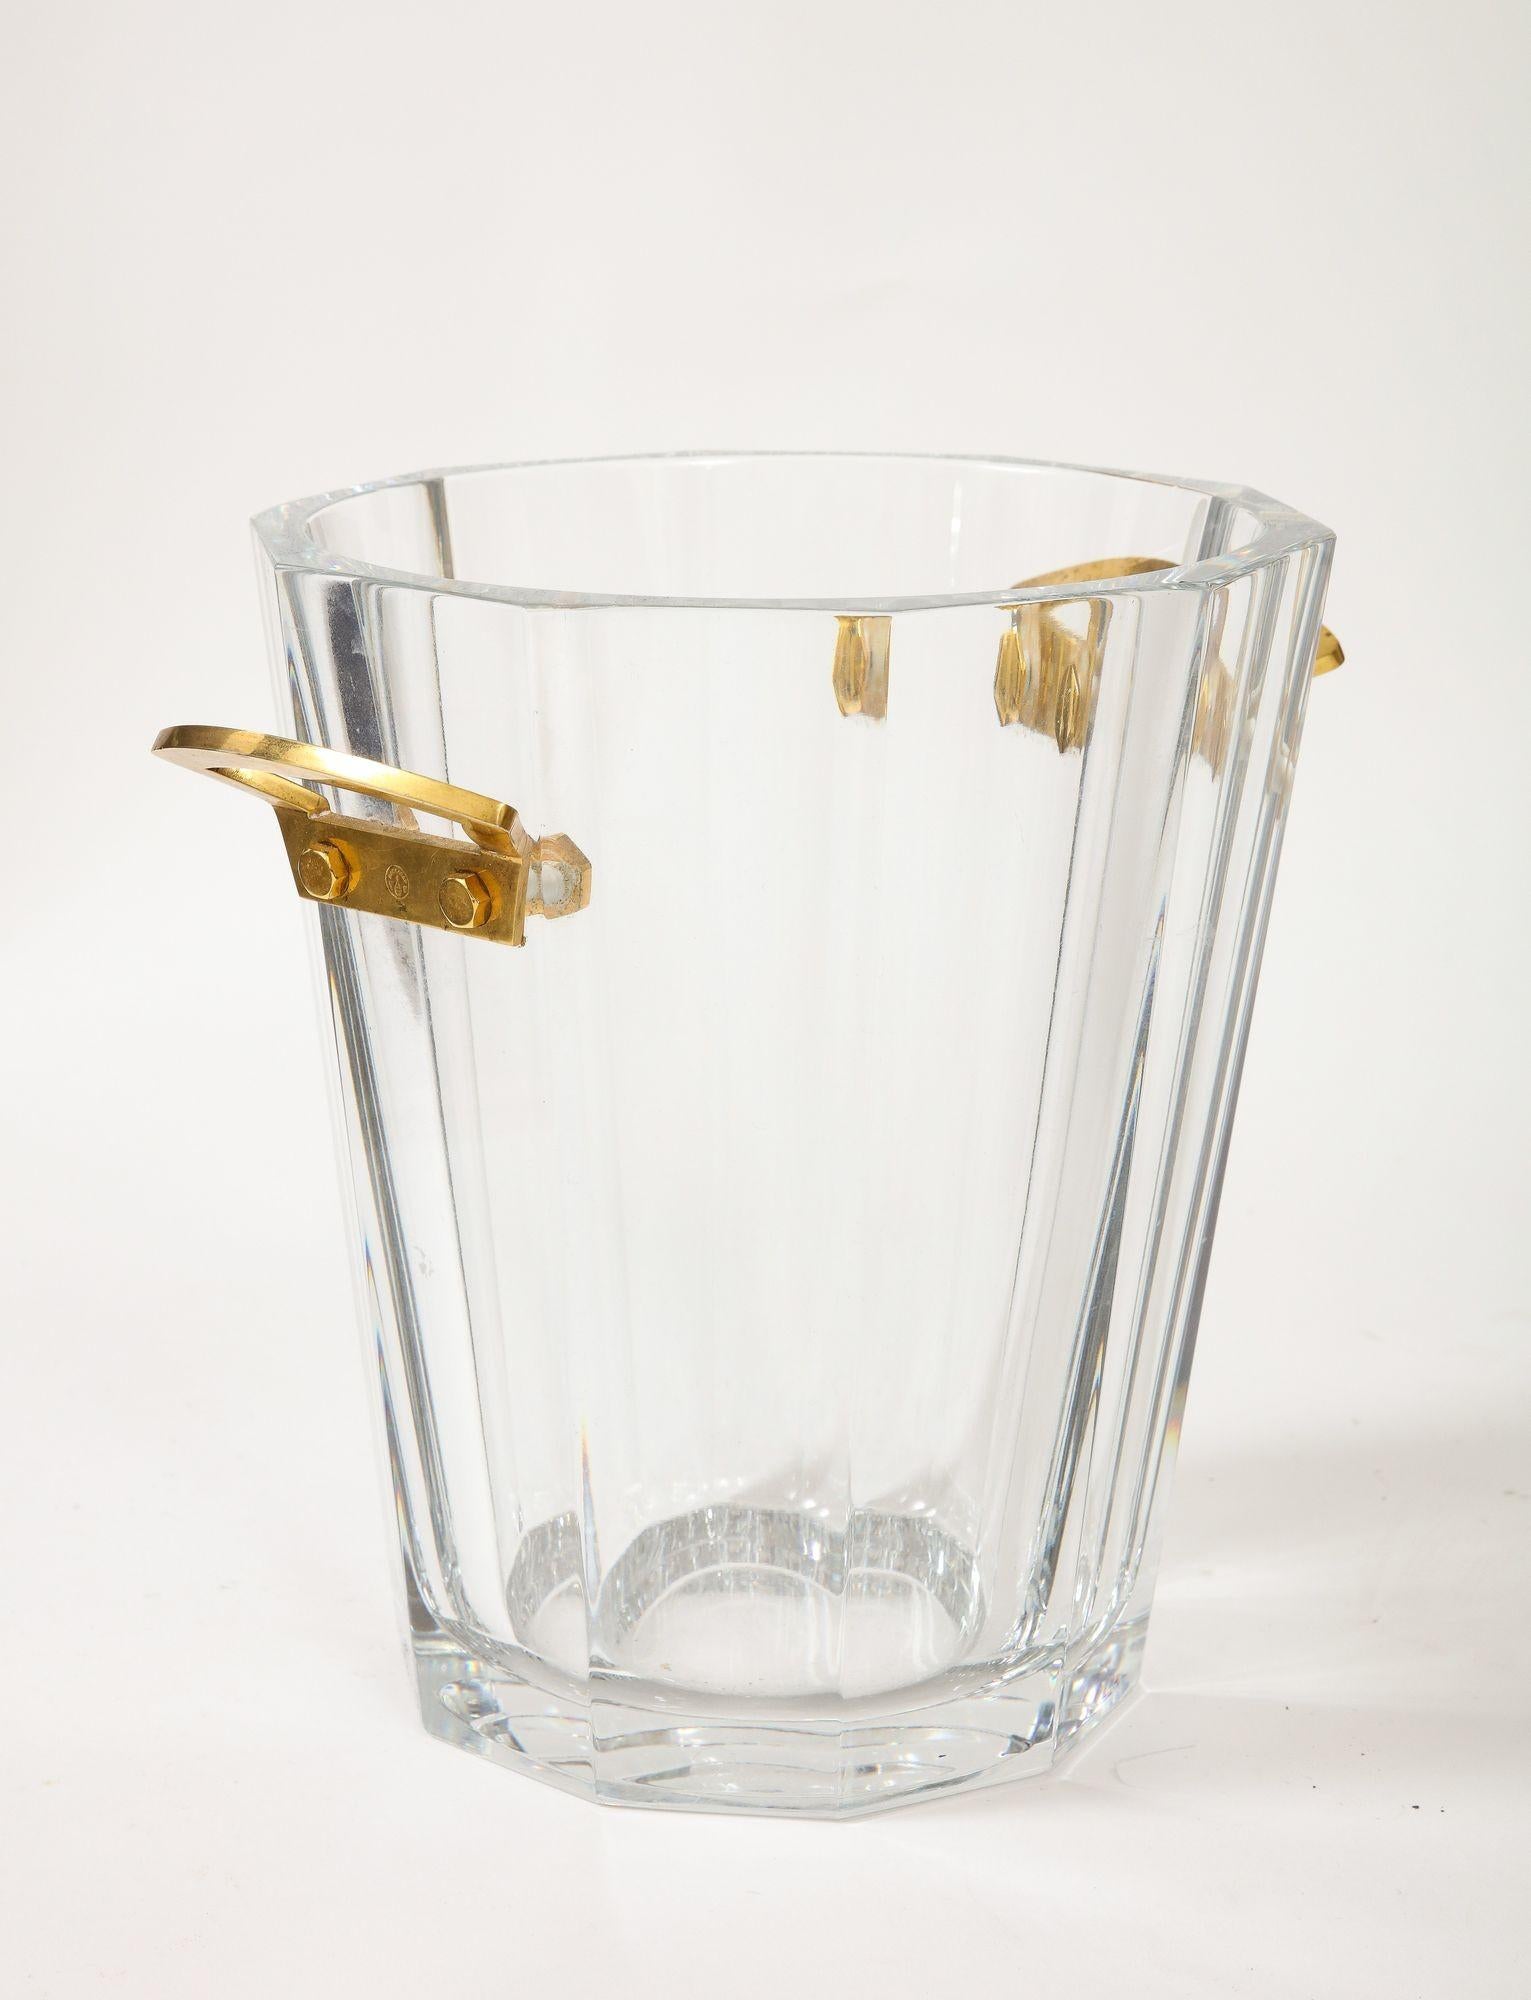 A beautiful baccarat Crystal Ice Bucket with faceted edges and gilded bronze handles with an etched makers mark.